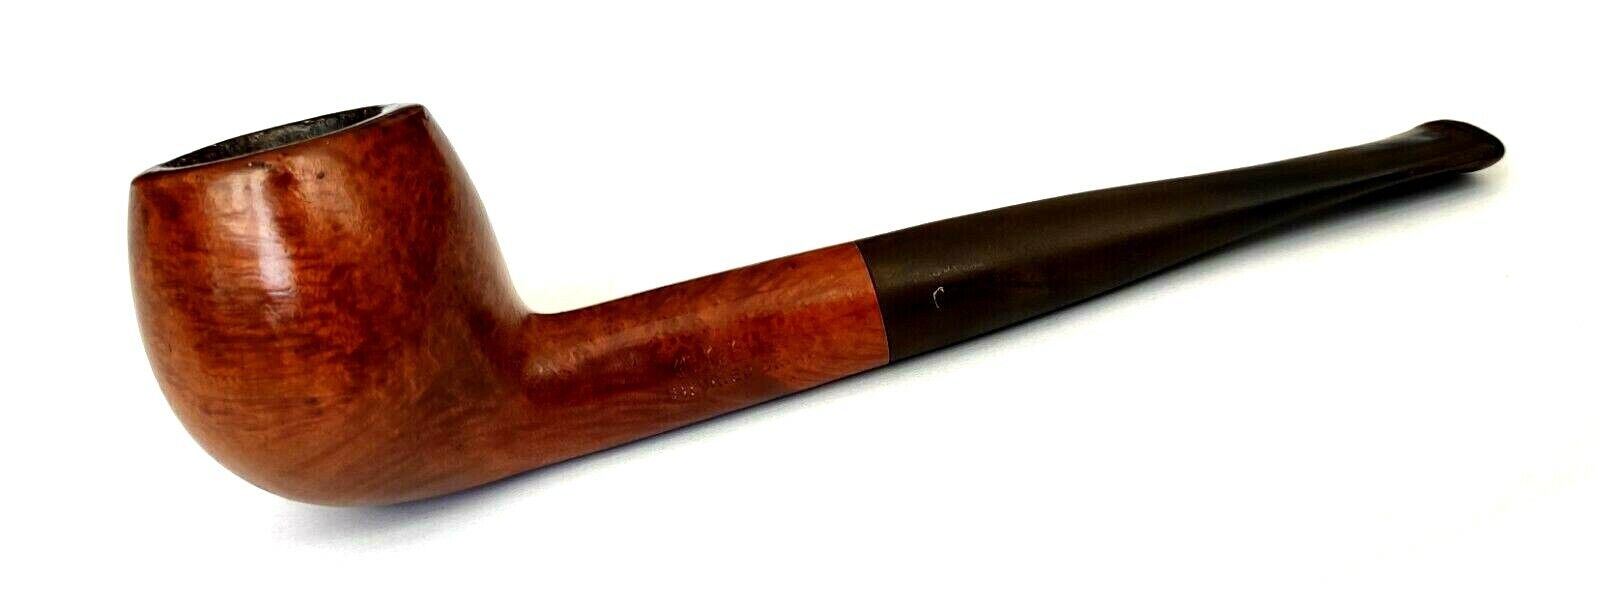 CALABRESI IMPORTED BRIAR ITALY APPLE ESTATE PIPE